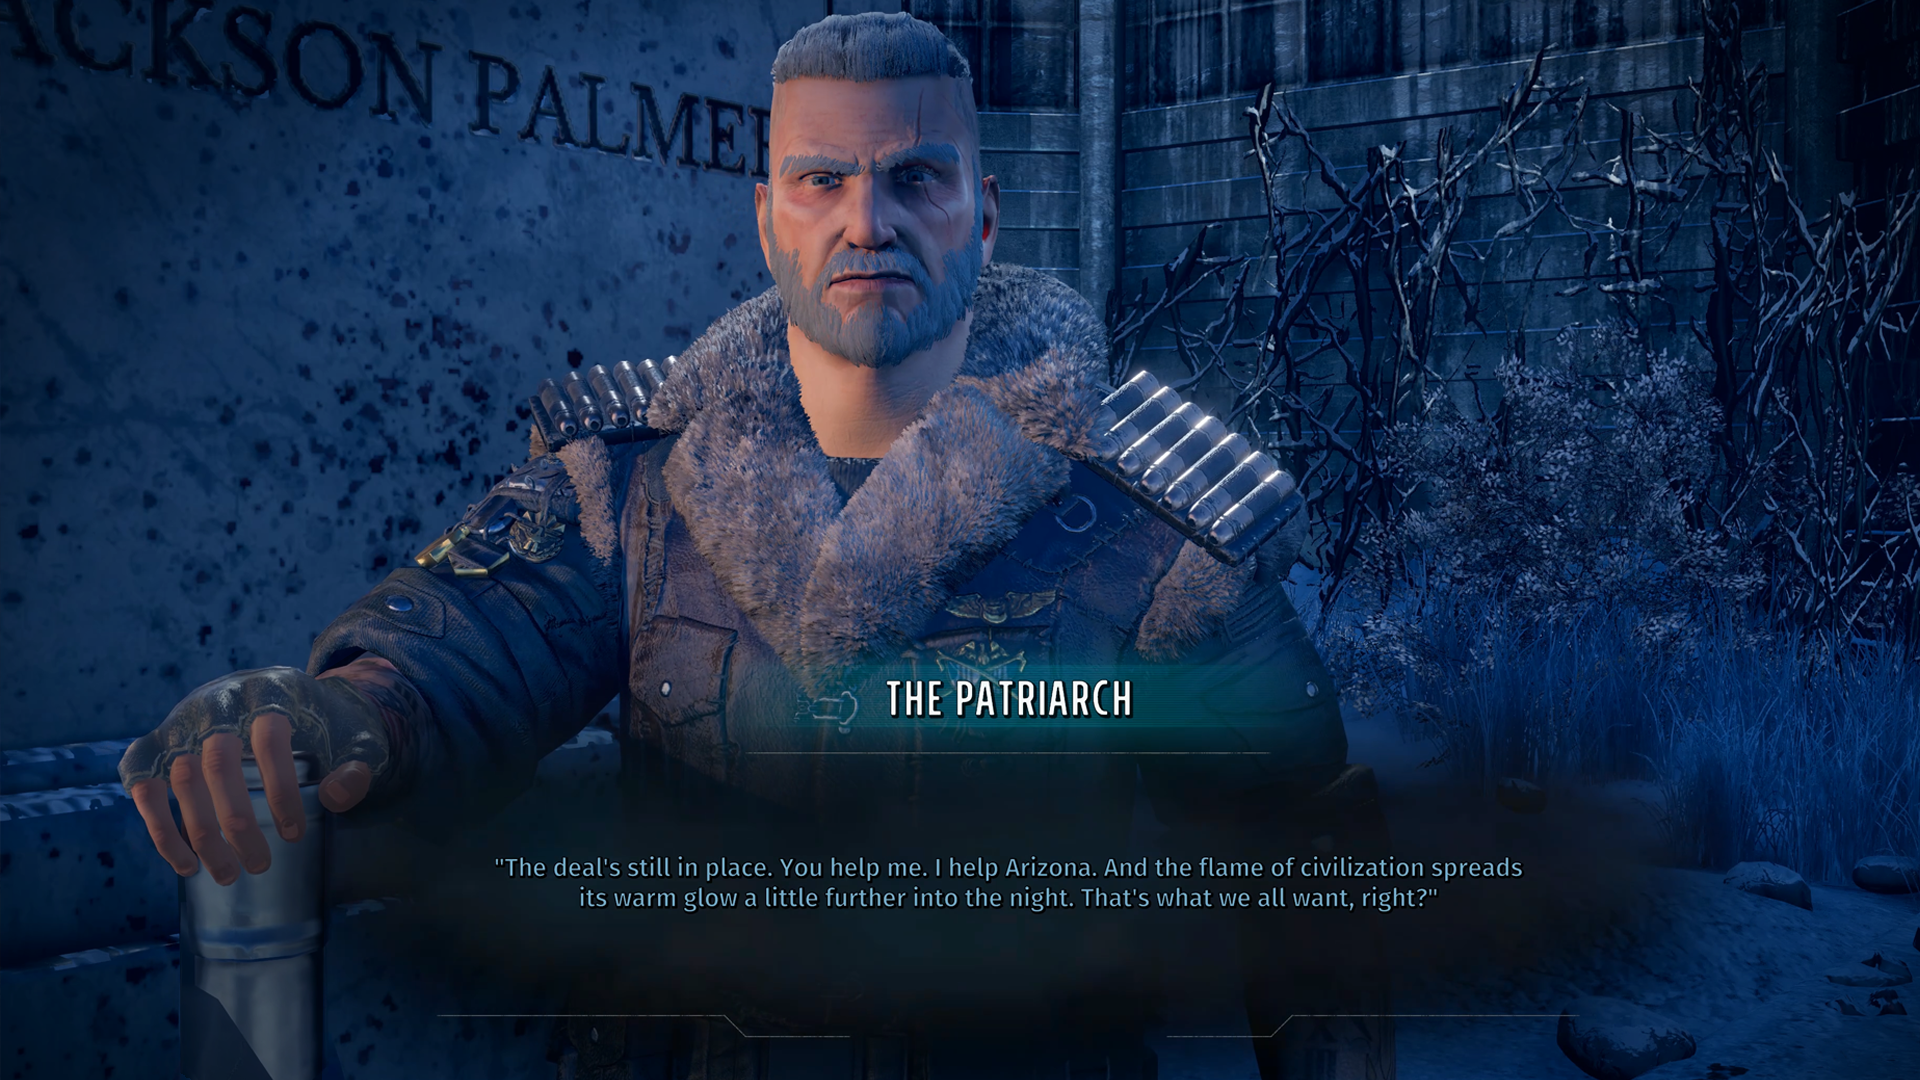 Meet the family at the heart of Wasteland 3’s story